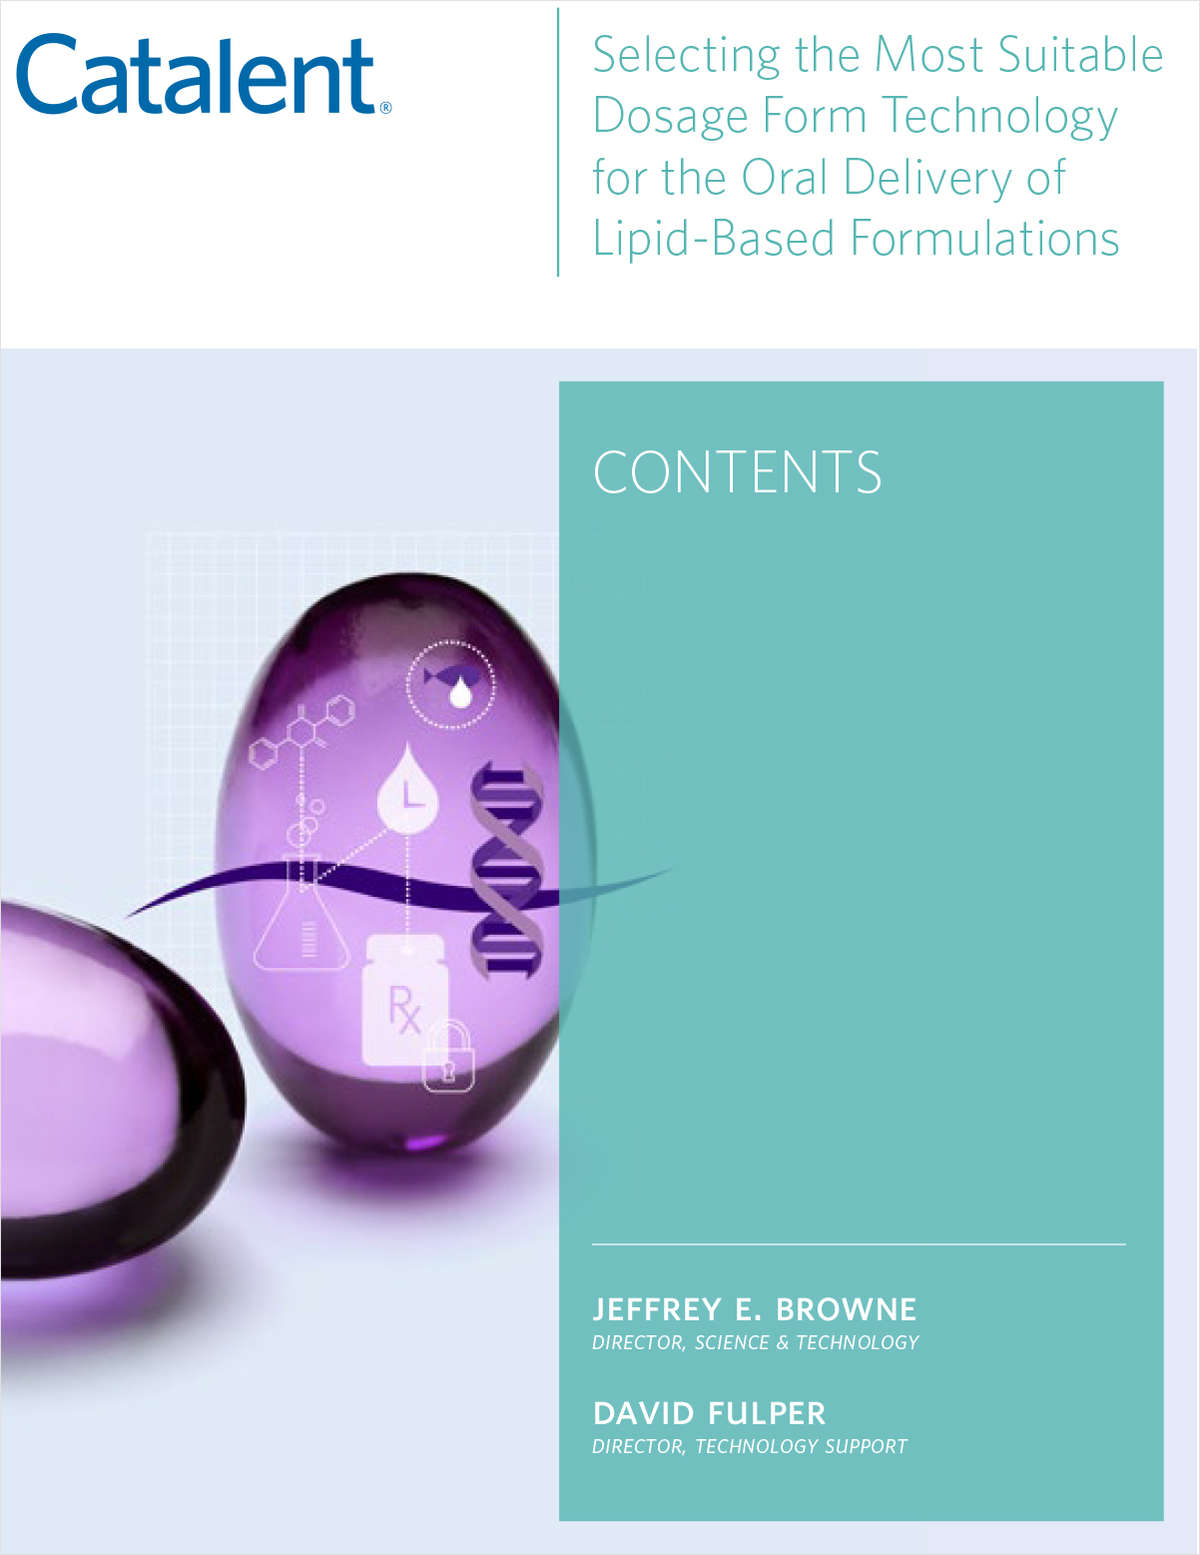 The Most Suitable Dosage Form Technologies for the Oral Delivery of Lipid-Based Formulations